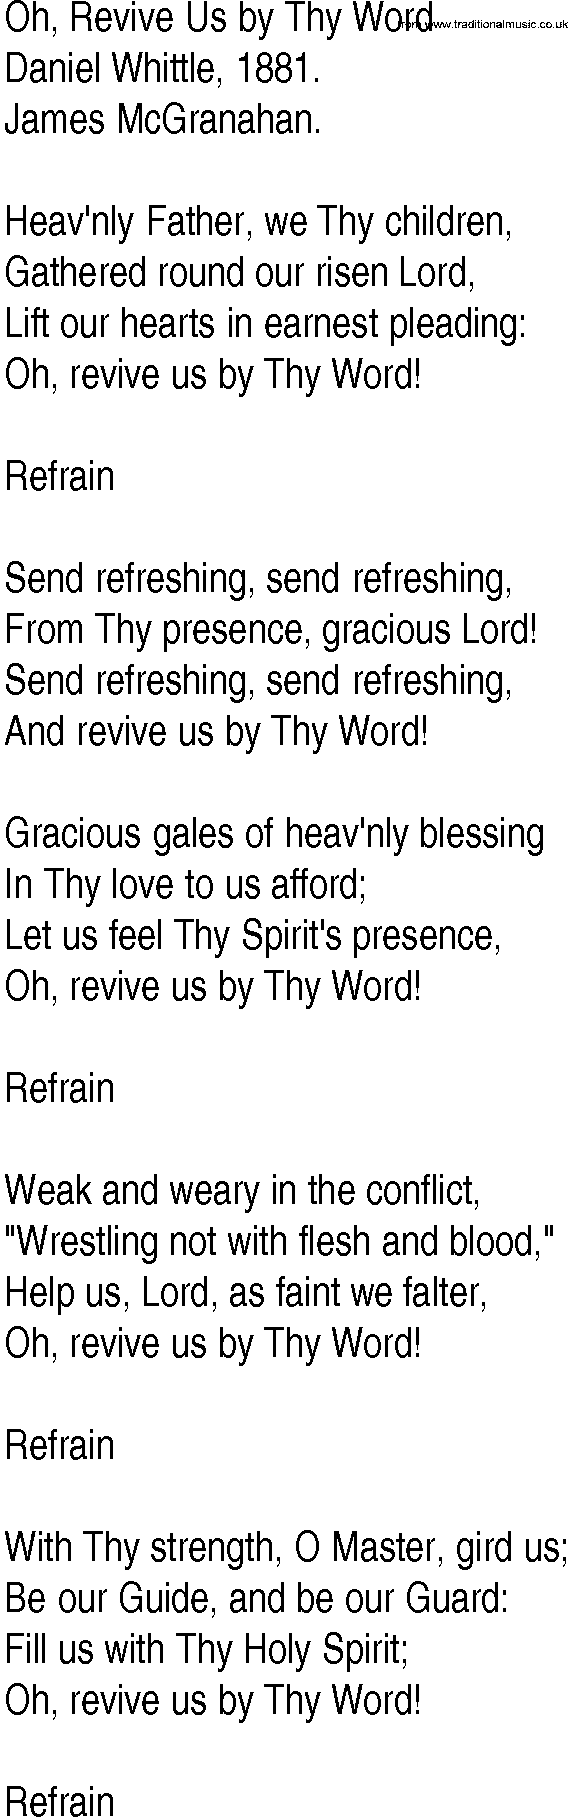 Hymn and Gospel Song: Oh, Revive Us by Thy Word by Daniel Whittle lyrics